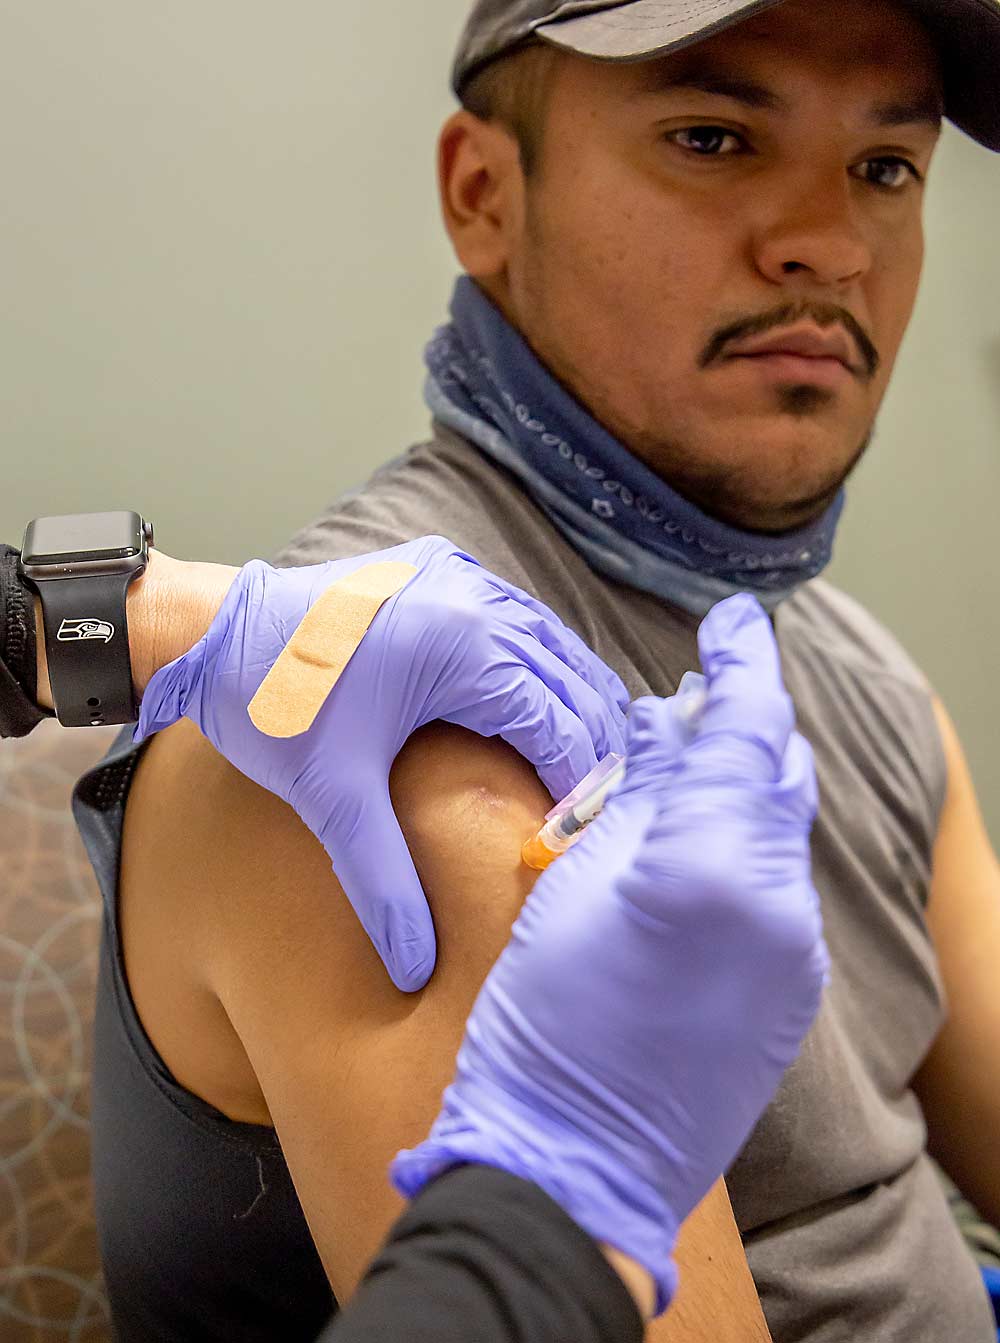 Jonathan Gonzalez receives his poke in the arm from Columbia Basin Health medical assistant Alma Alvarez. (Ross Courtney/Good Fruit Grower)